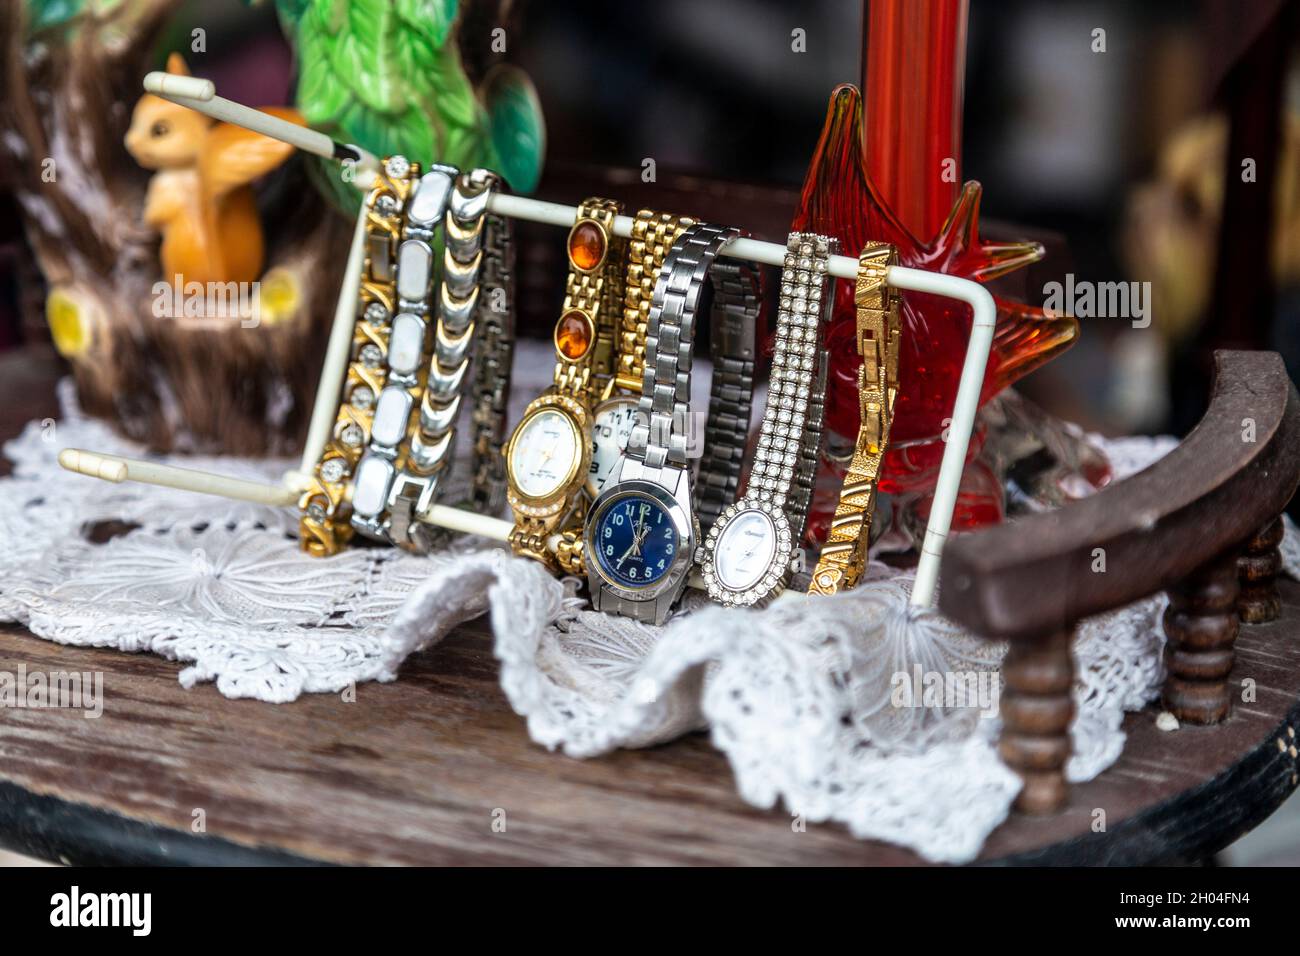 Display of vintage watches and bracelets at a charity shop in Manod, Snowdonia, Wales, UK Stock Photo